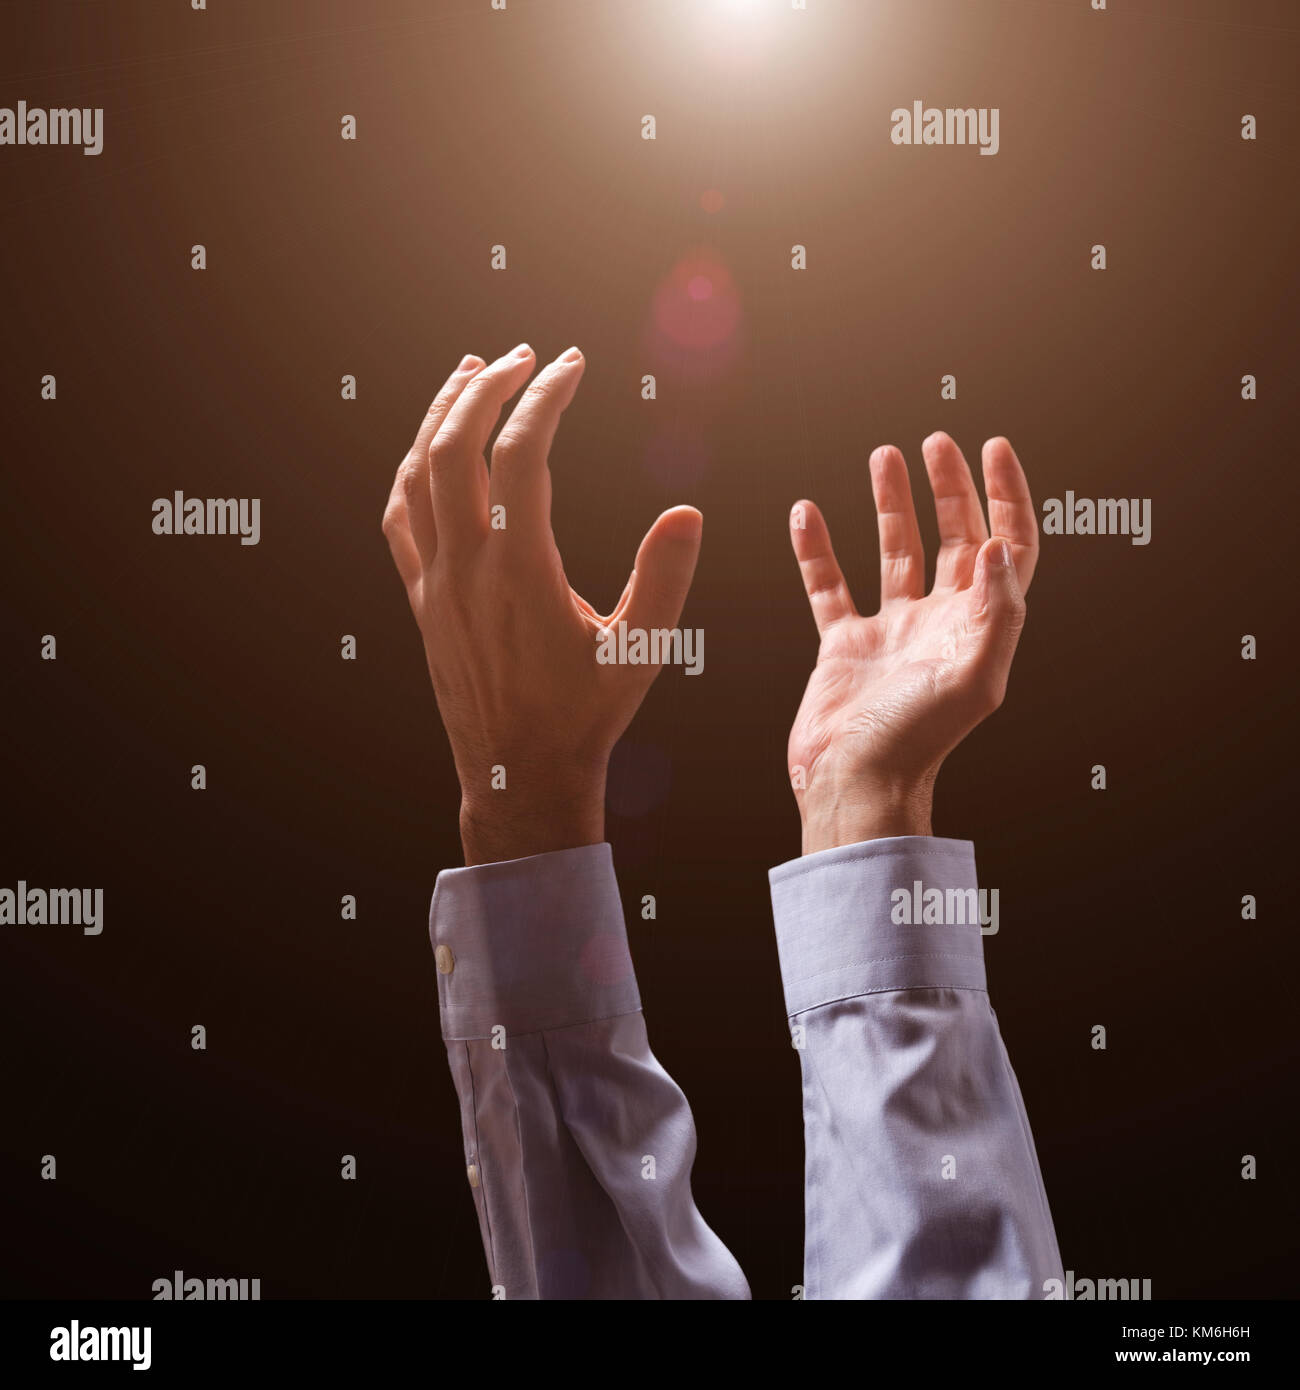 Male arms and hands raised and outstretched in the air to divine light. Man praying, begging, pleading imploring or supplicating. Black background. Stock Photo